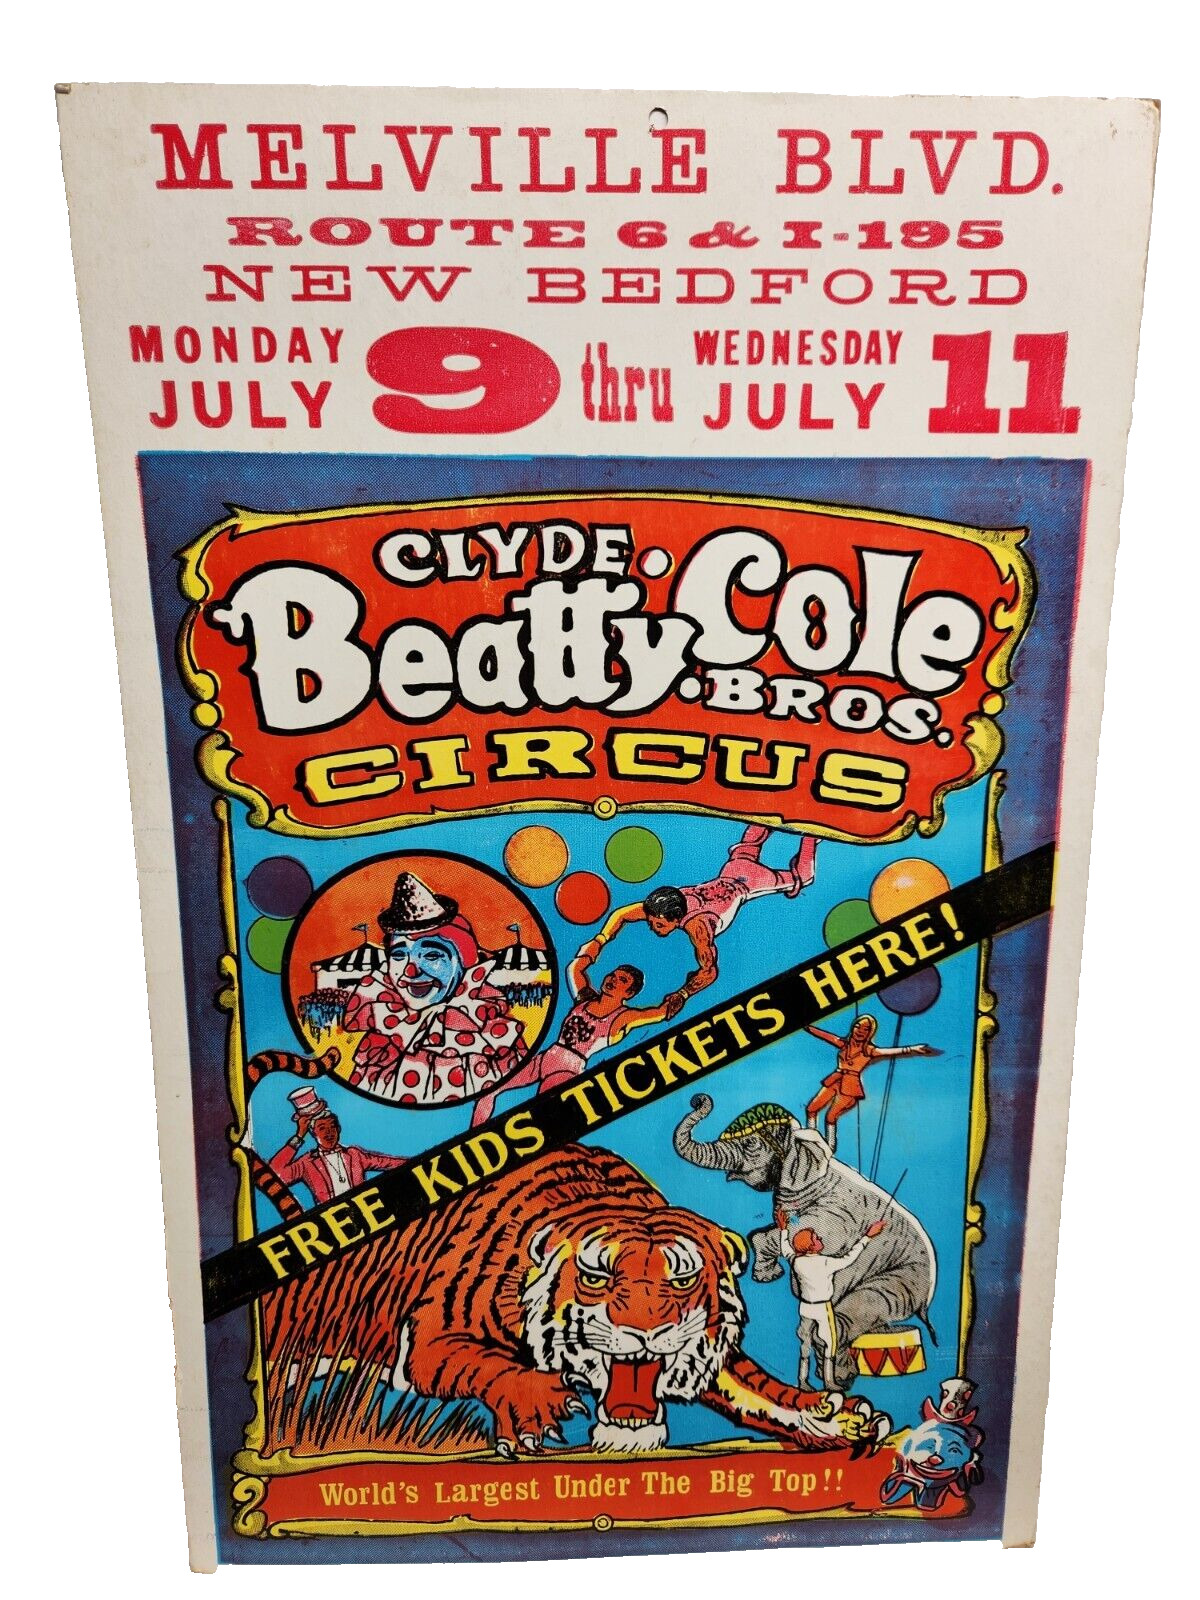 Clyde Beatty * Cole Bros. Circus Poster - New Bedford - Clowns - Tigers -Big Top